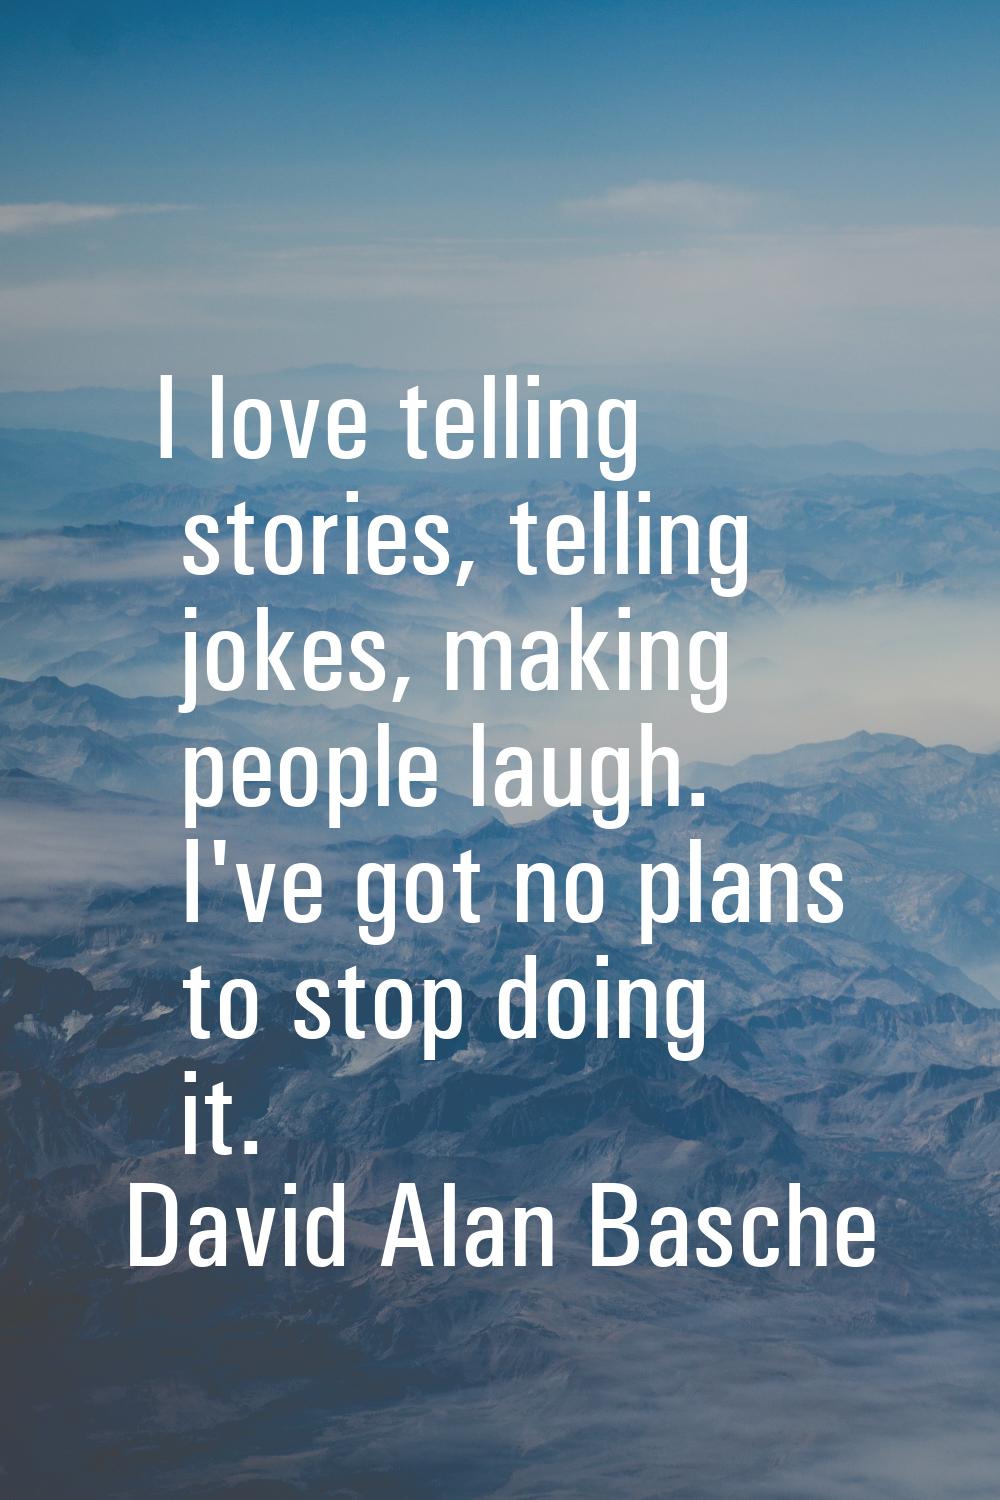 I love telling stories, telling jokes, making people laugh. I've got no plans to stop doing it.